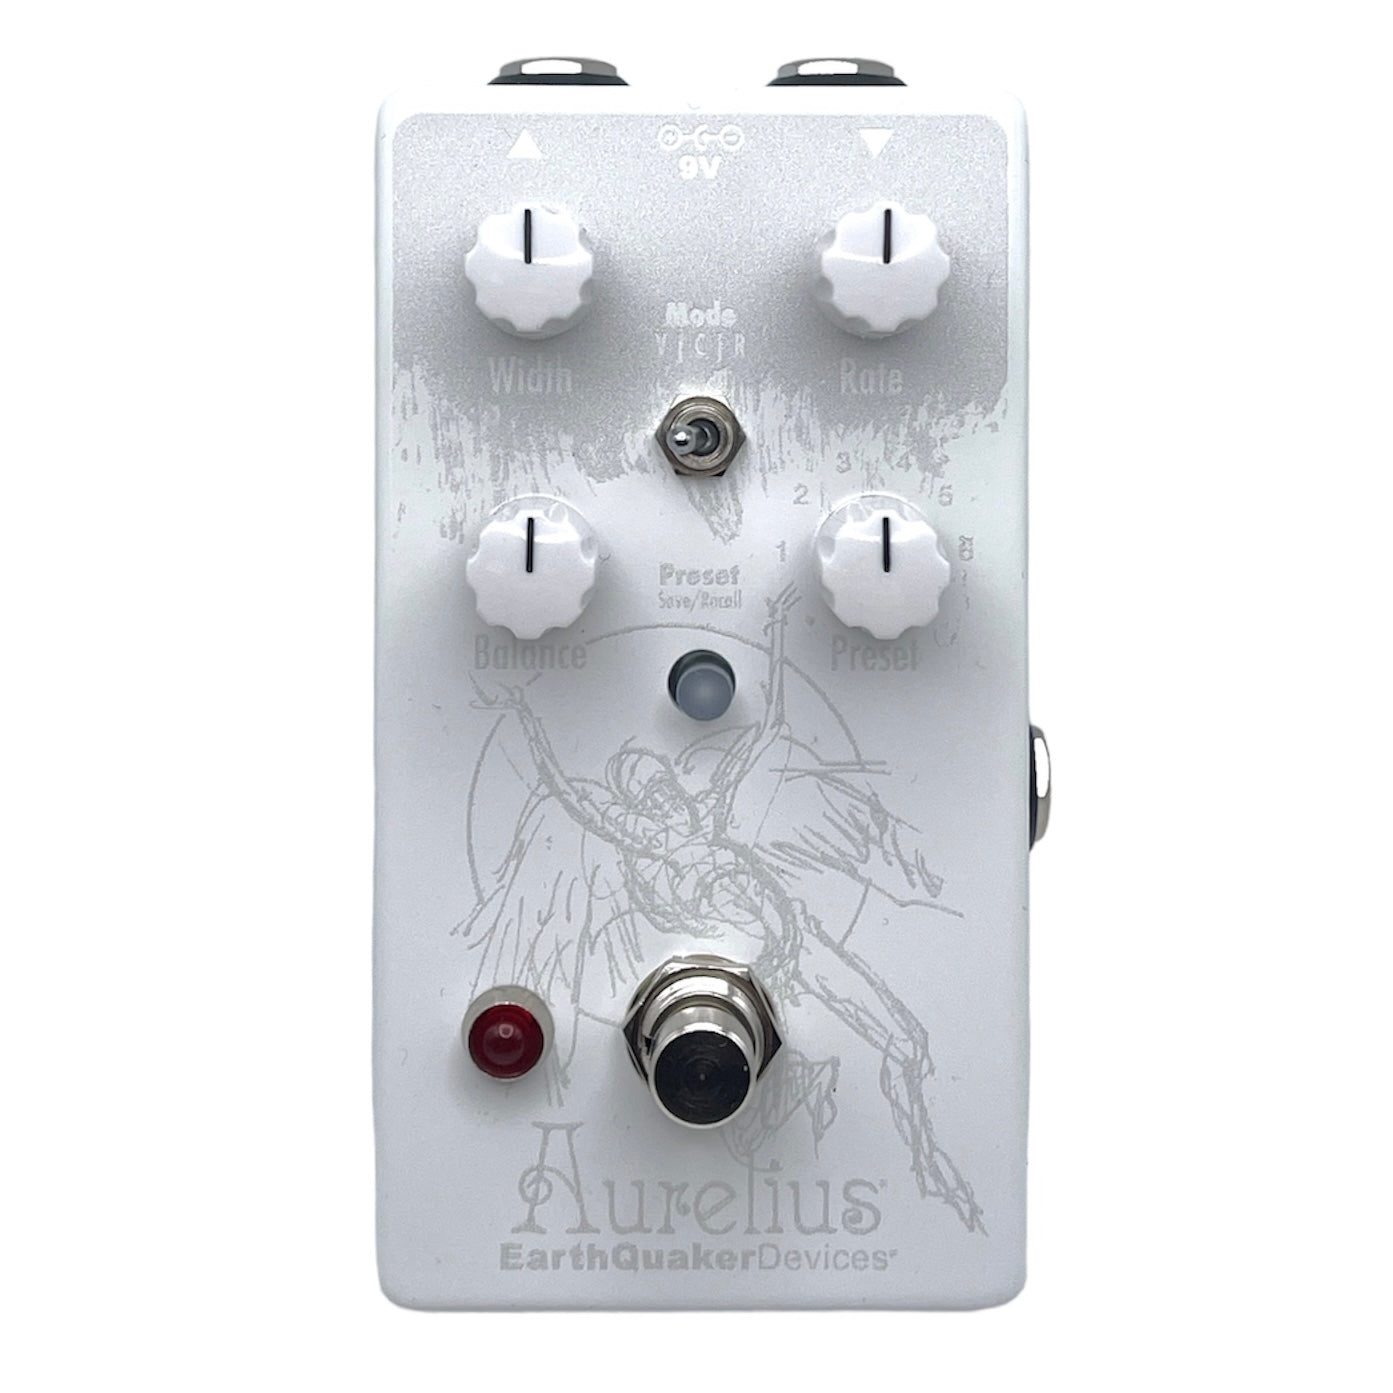 ROCK HALL X EARTHQUAKER DEVICES - LIMITED EDITION WHITE AURELIUS 